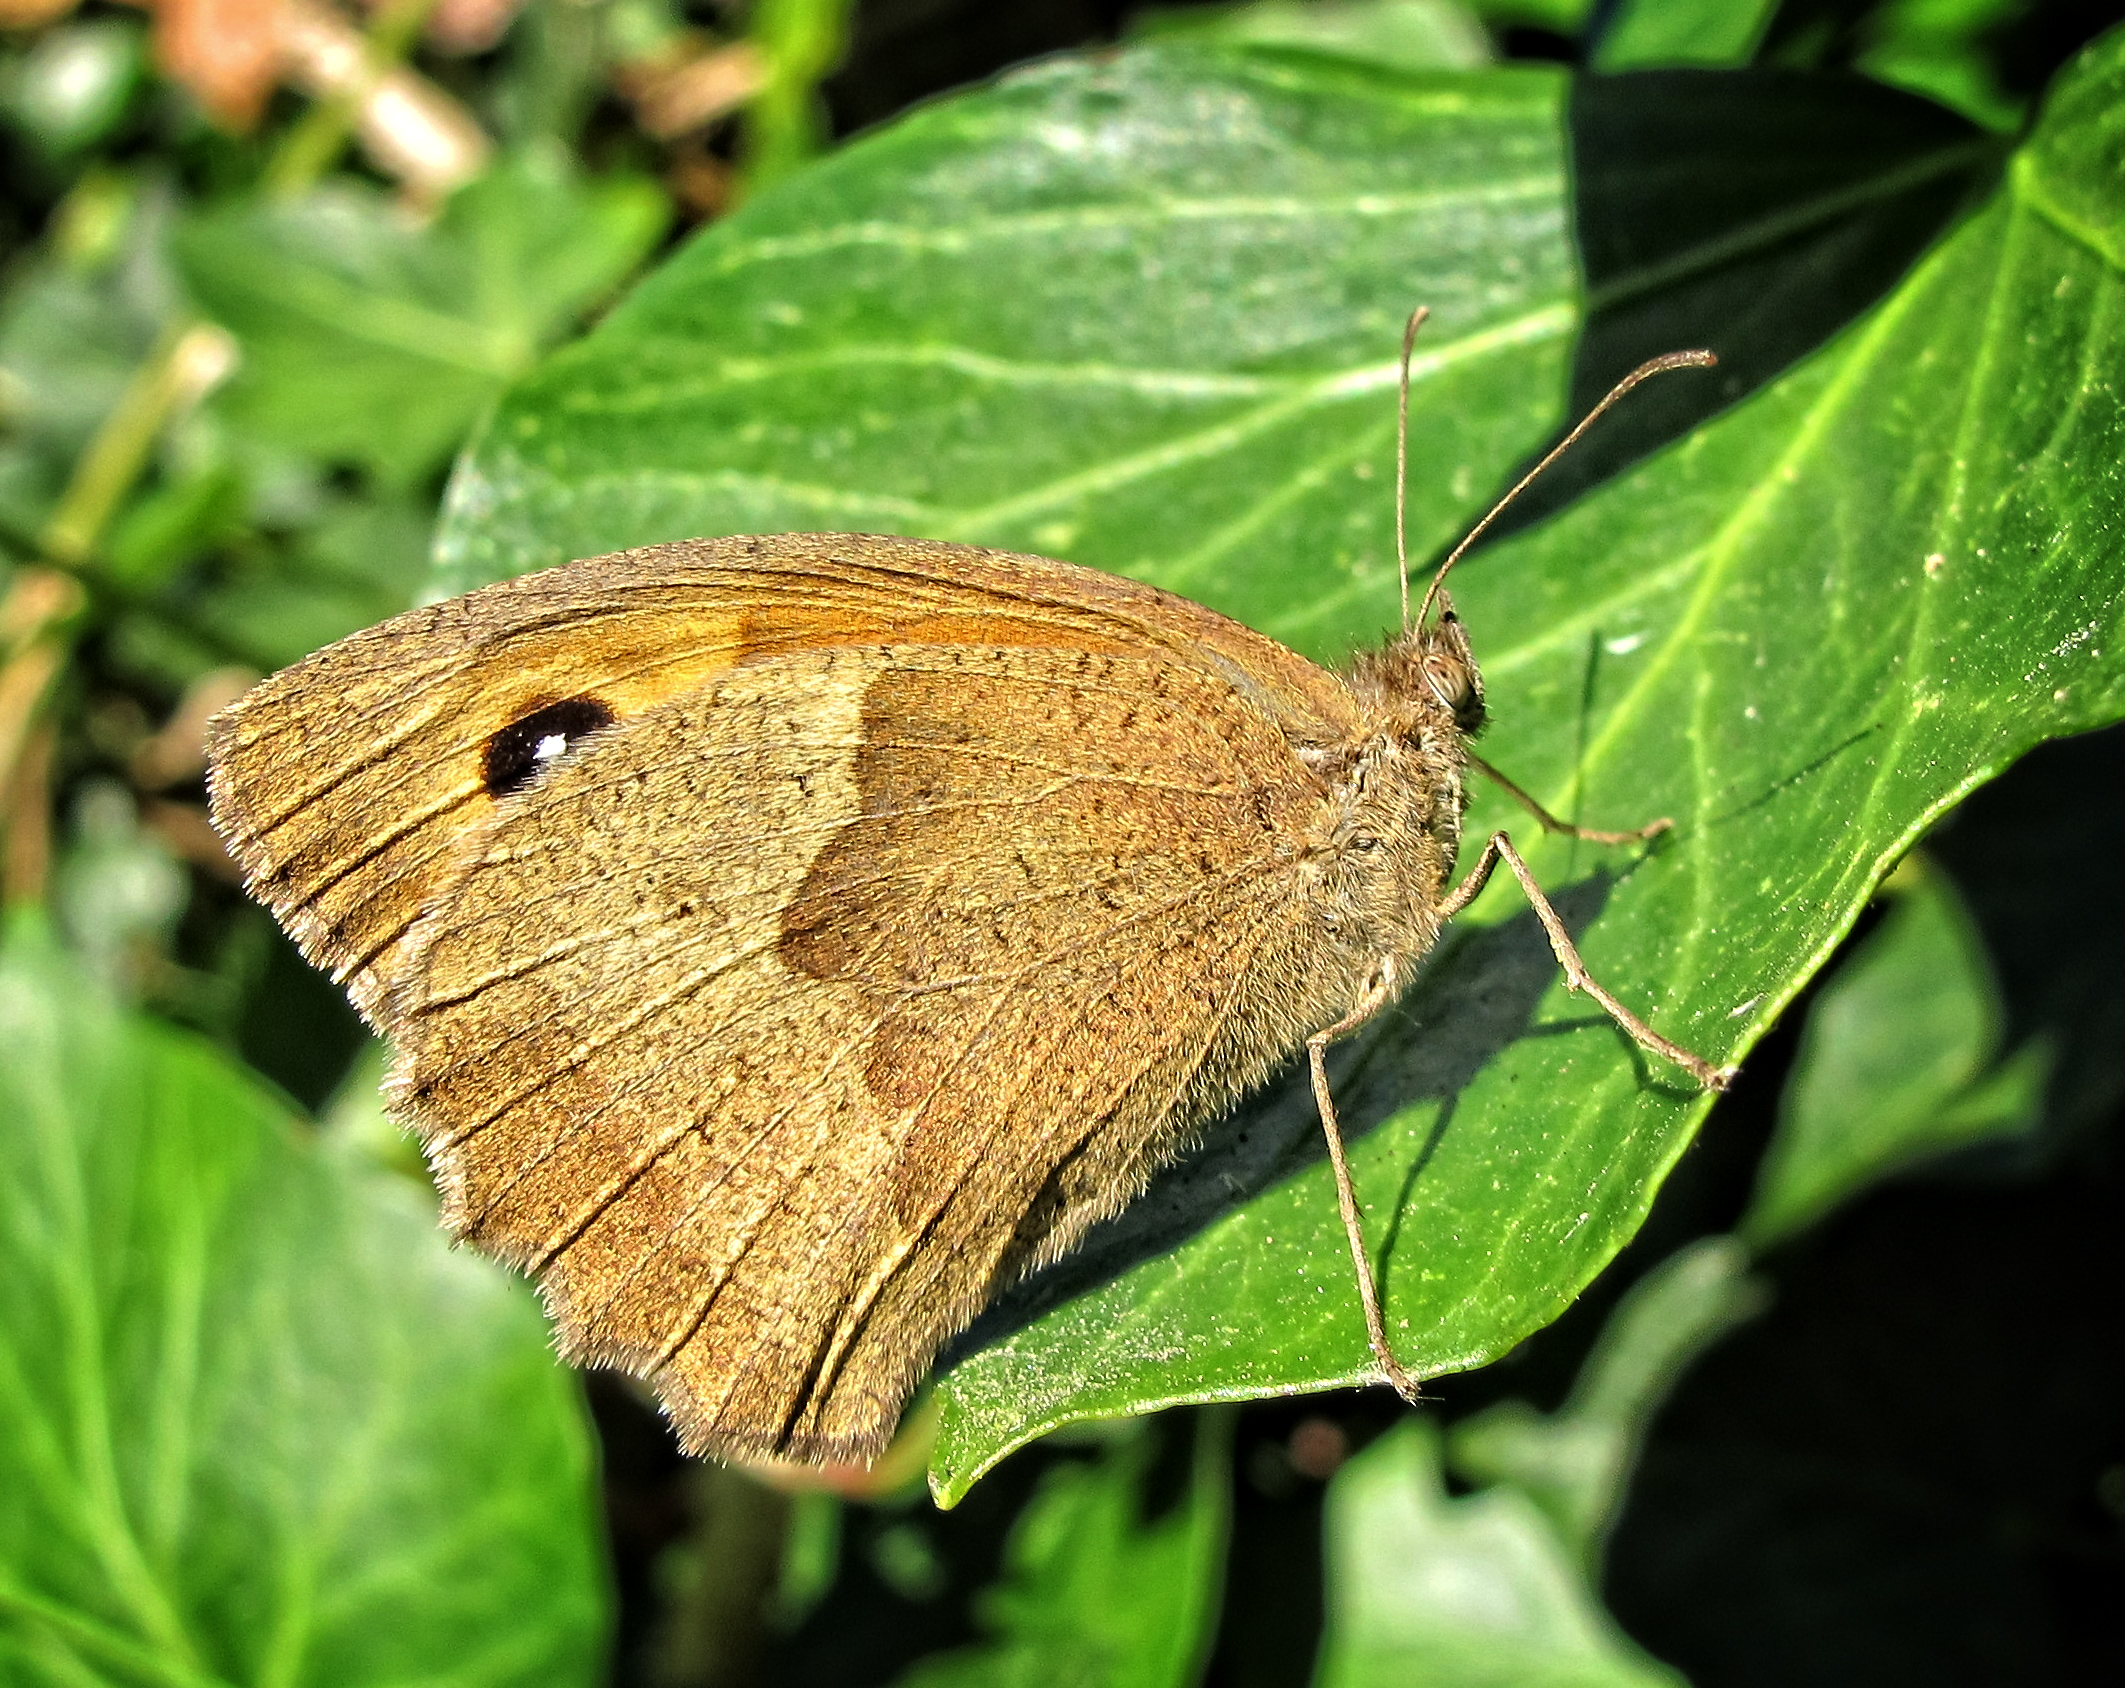 a brown and black erfly sitting on green leaves